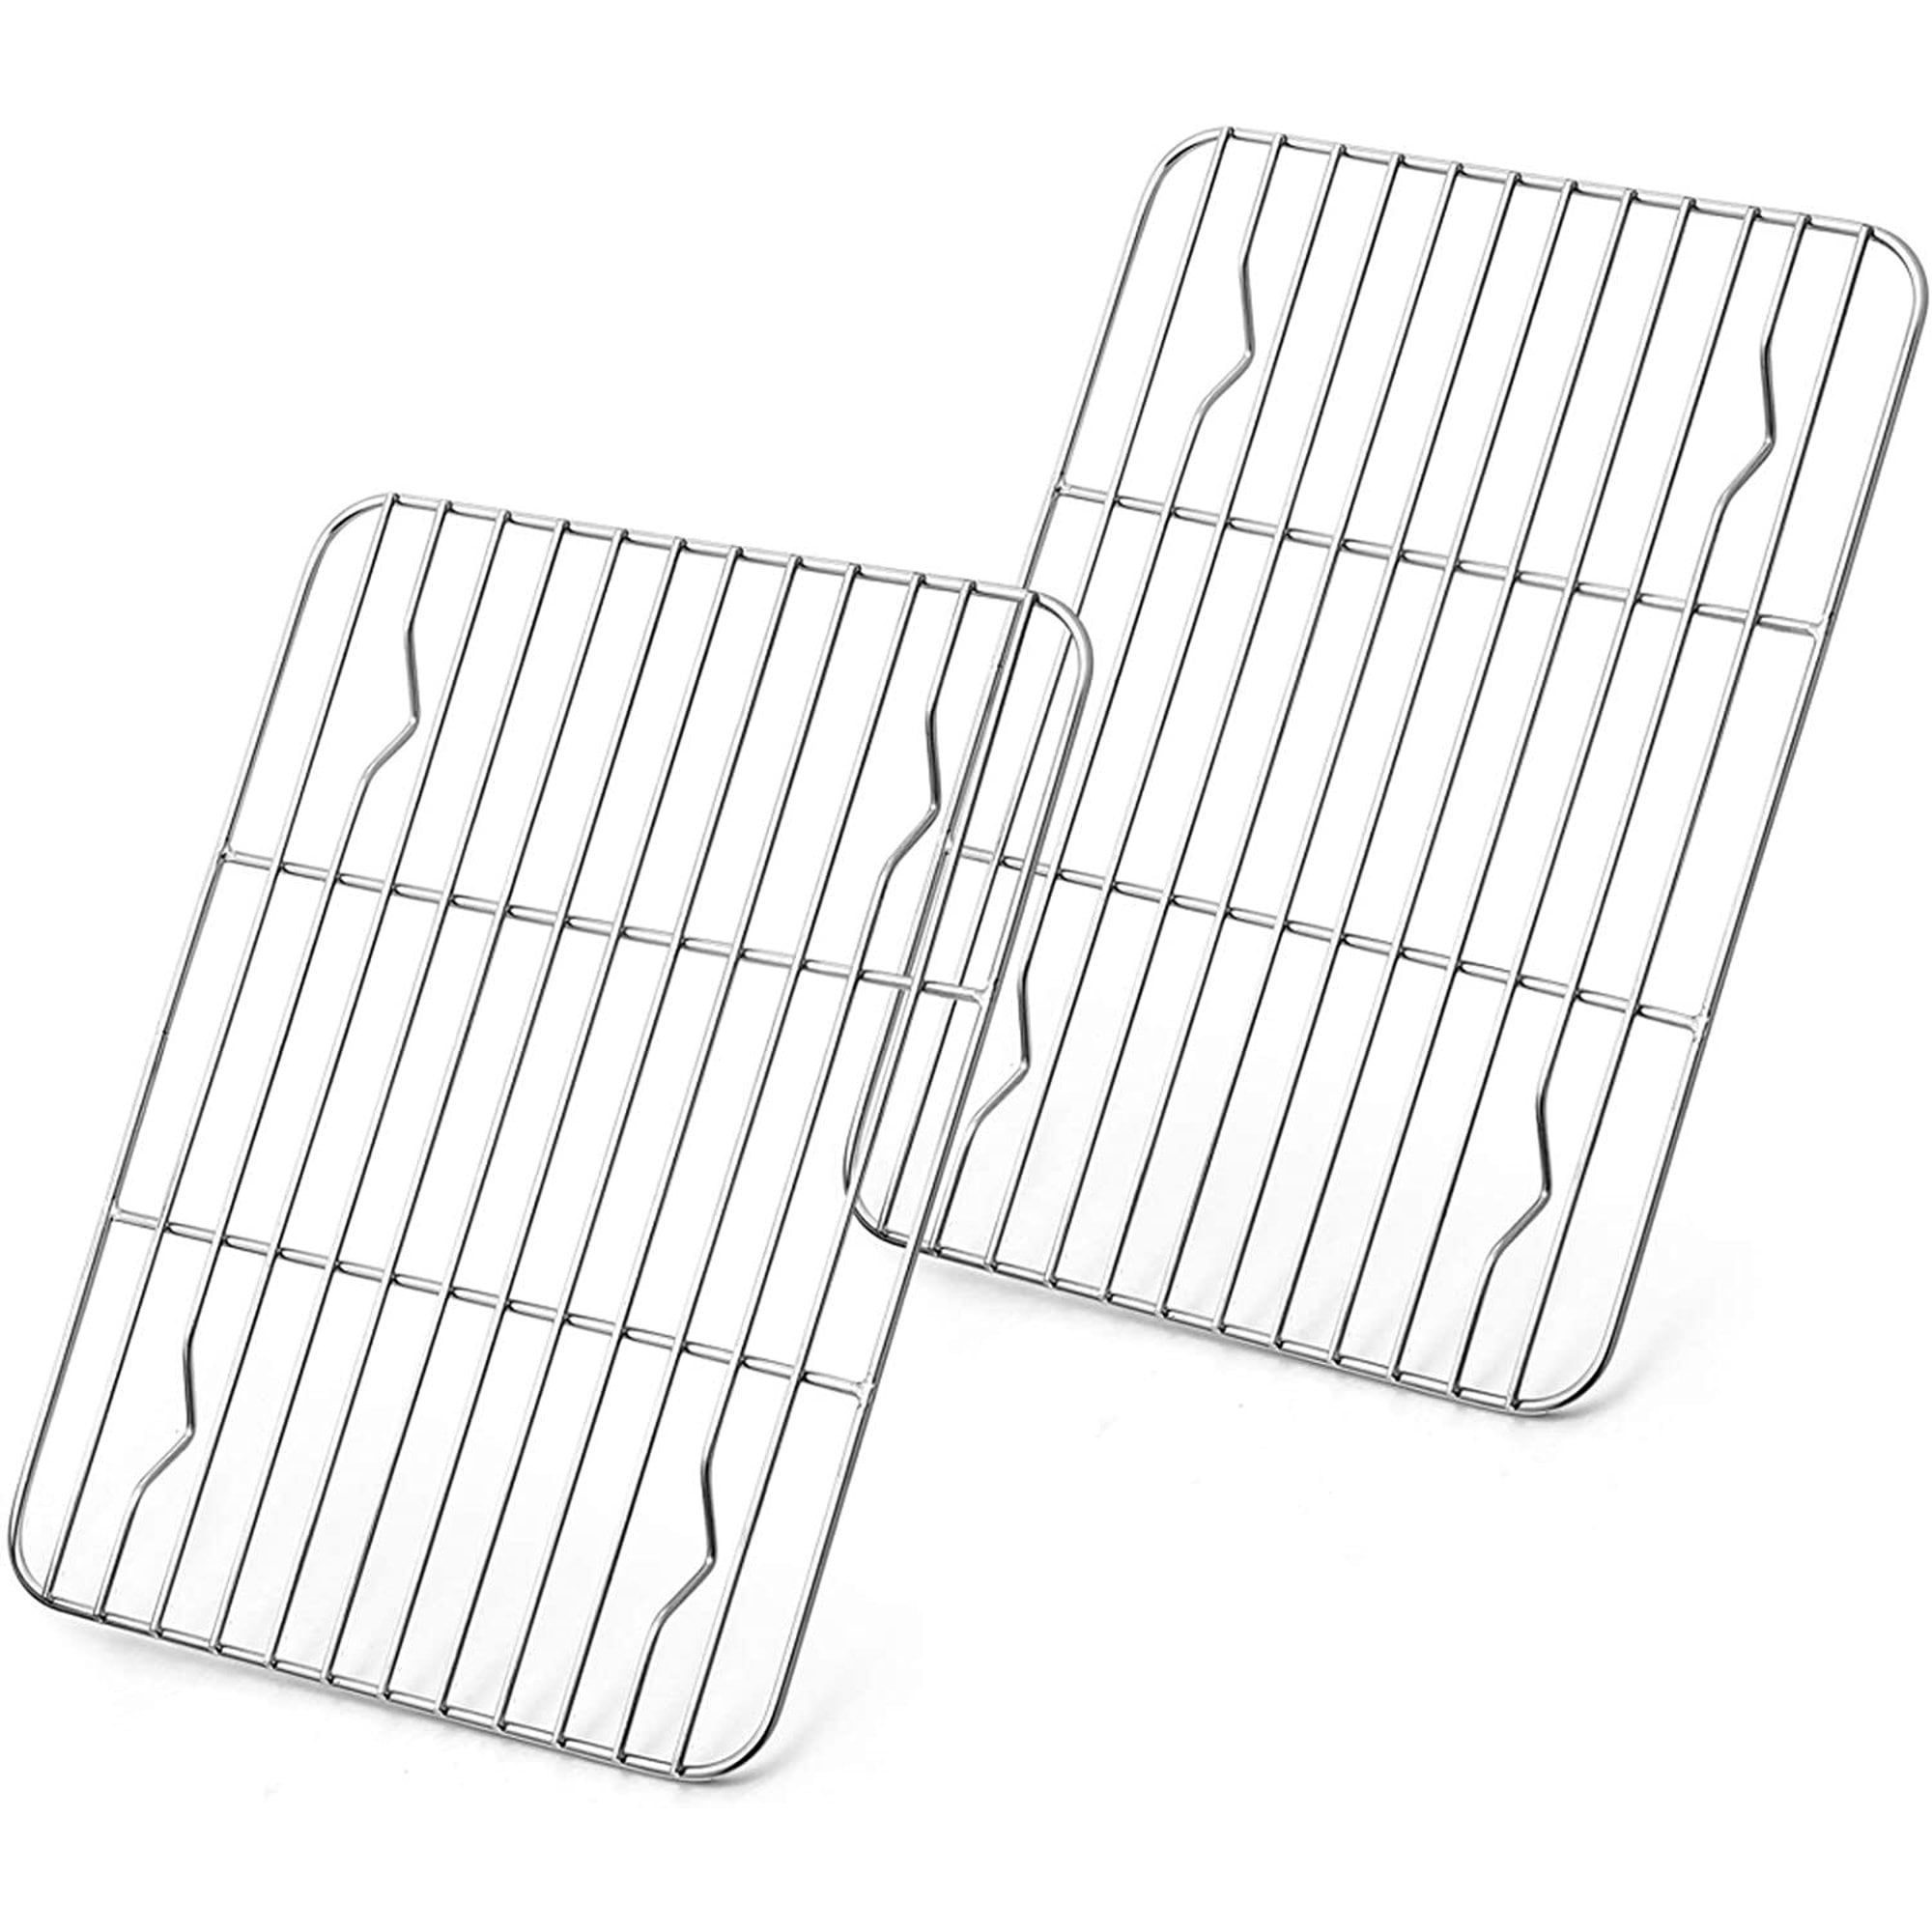 Spring Chef Cooling Rack & Baking Rack - Heavy Duty 100% Stainless Steel  Cookie Cooling Racks, Wire Rack for Baking, Oven Safe 10 x 15 Inches Fits